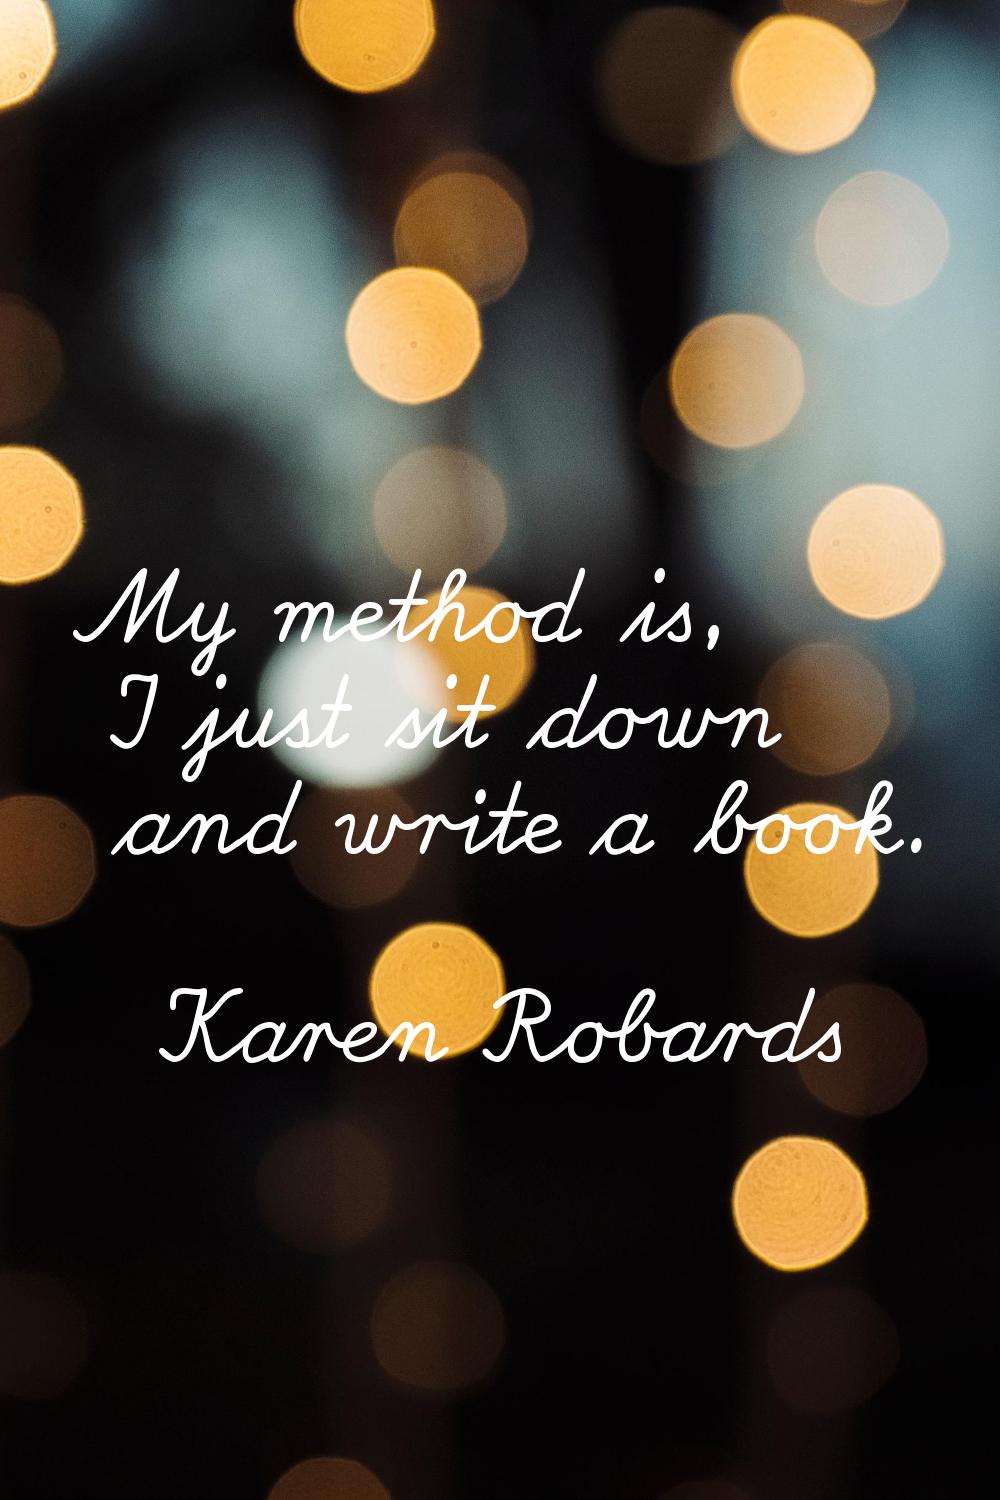 My method is, I just sit down and write a book.